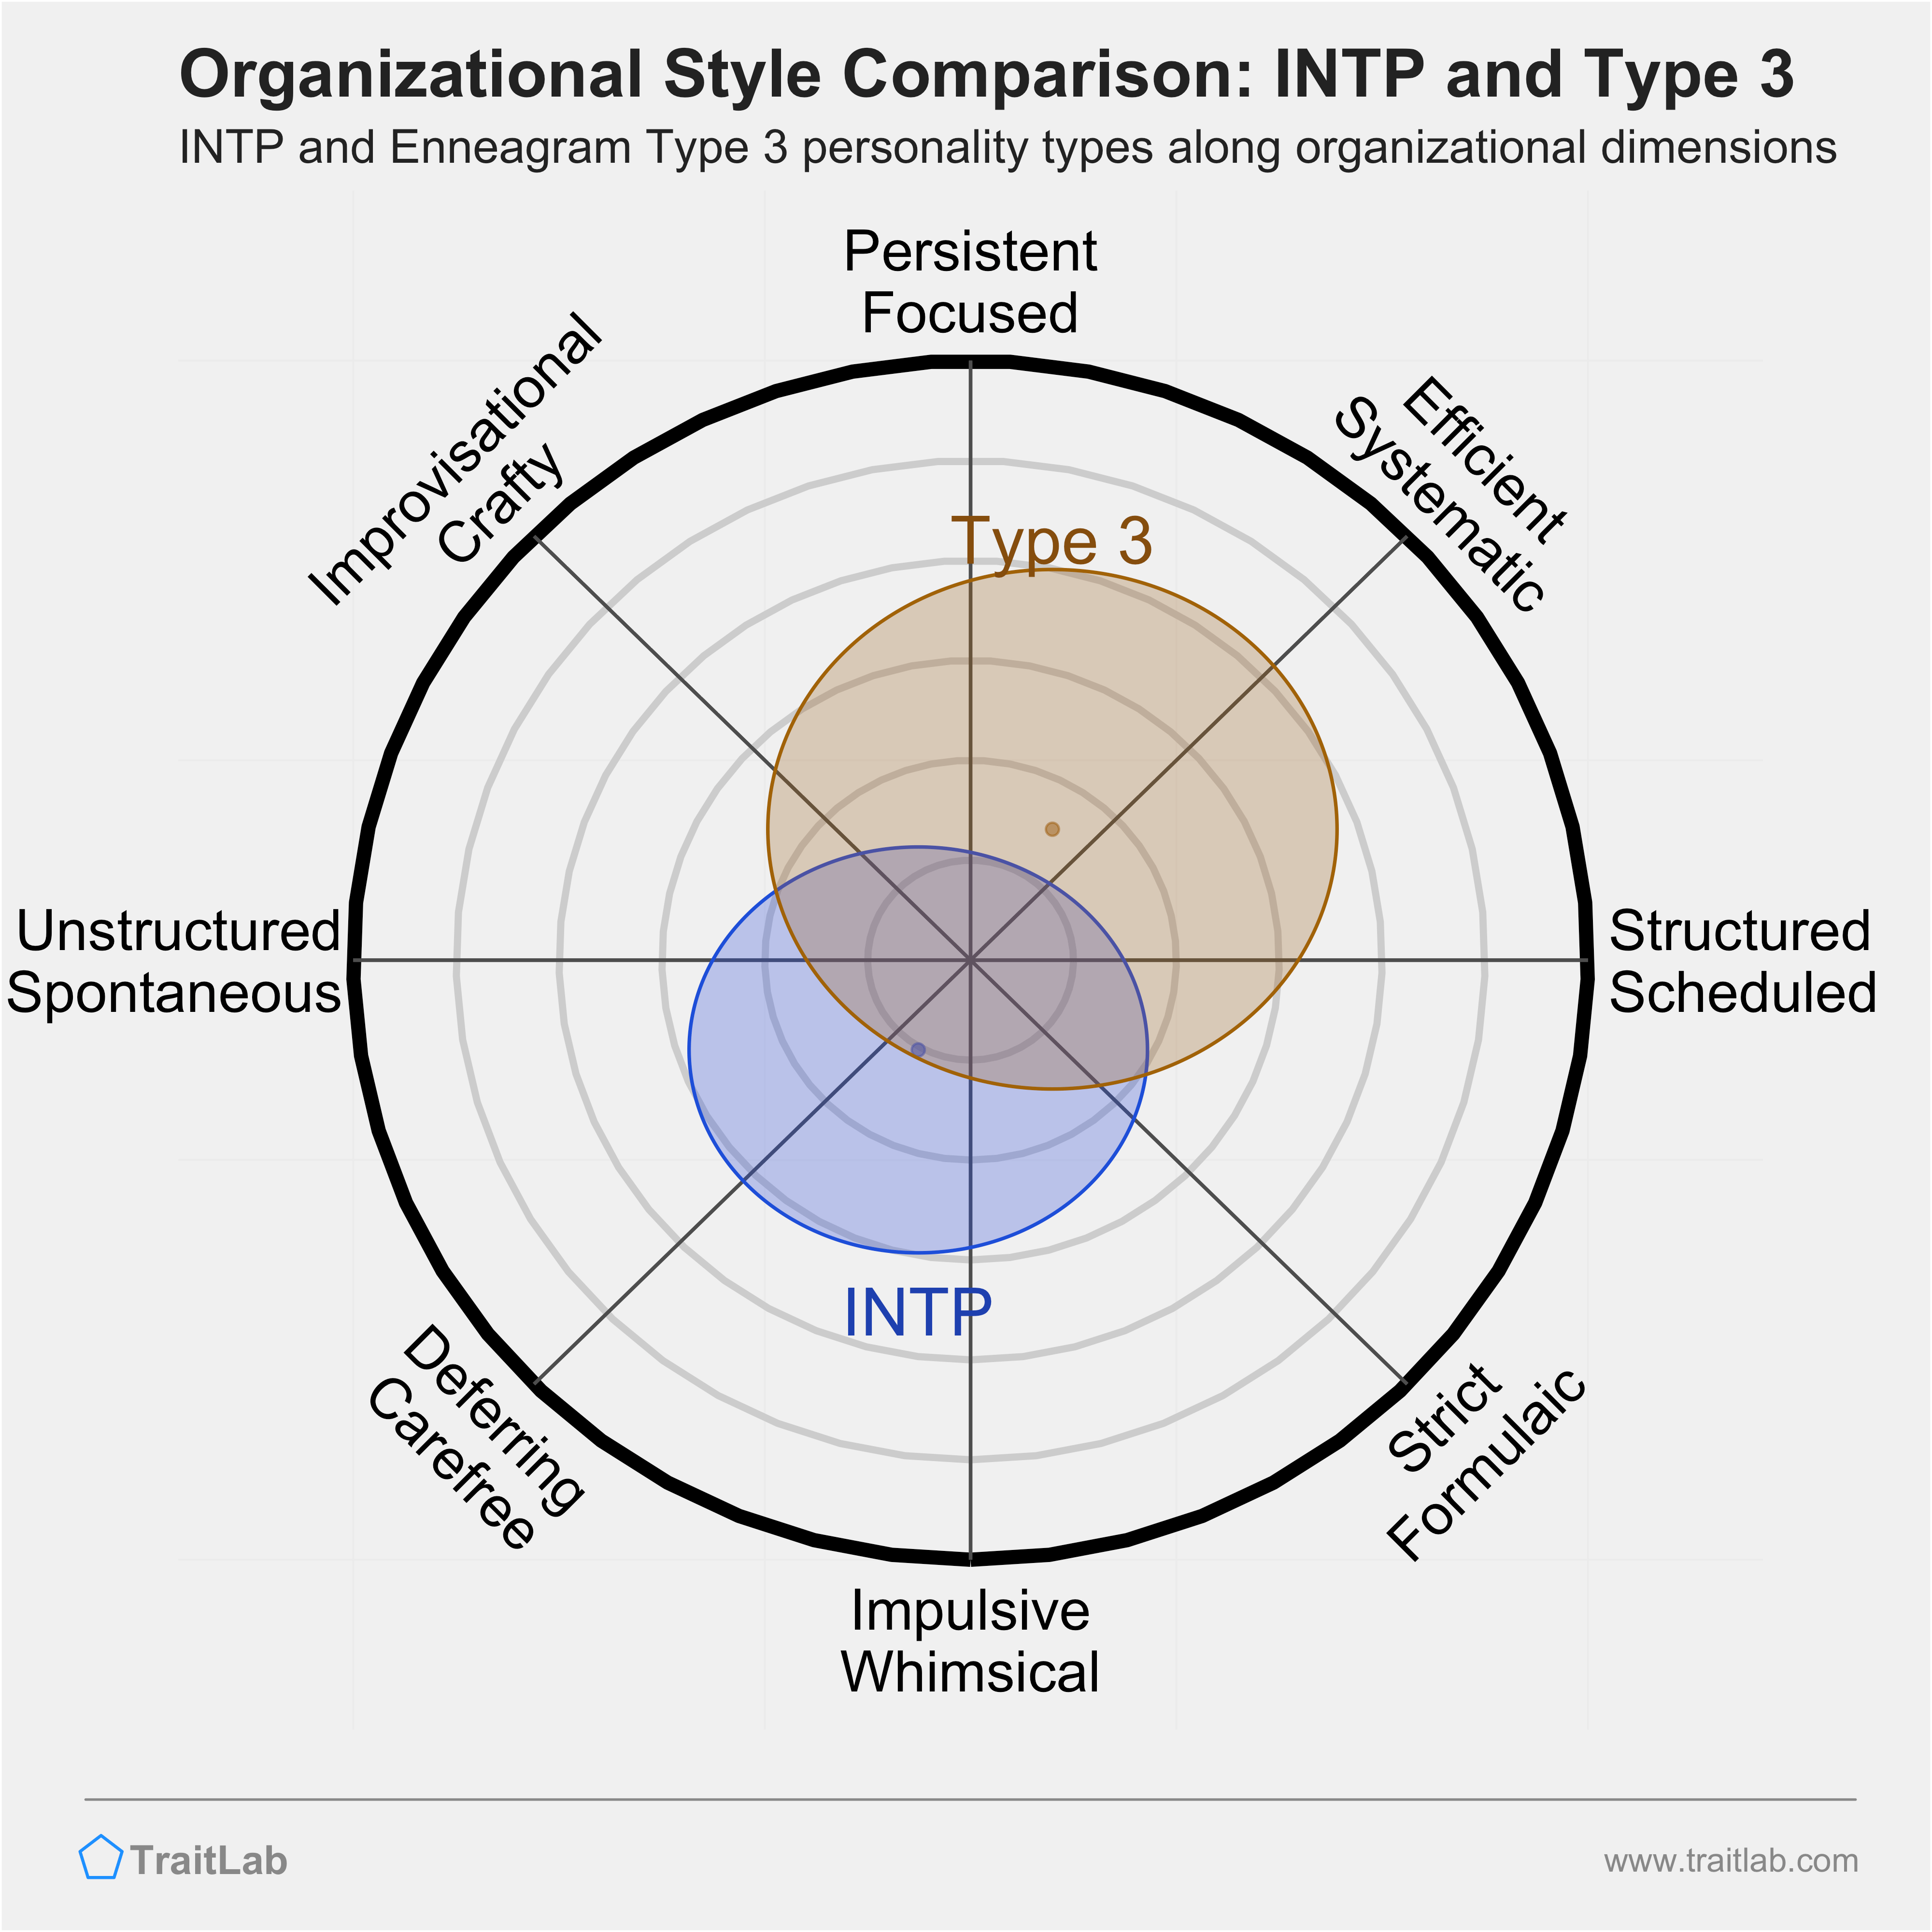 INTP and Type 3 comparison across organizational dimensions